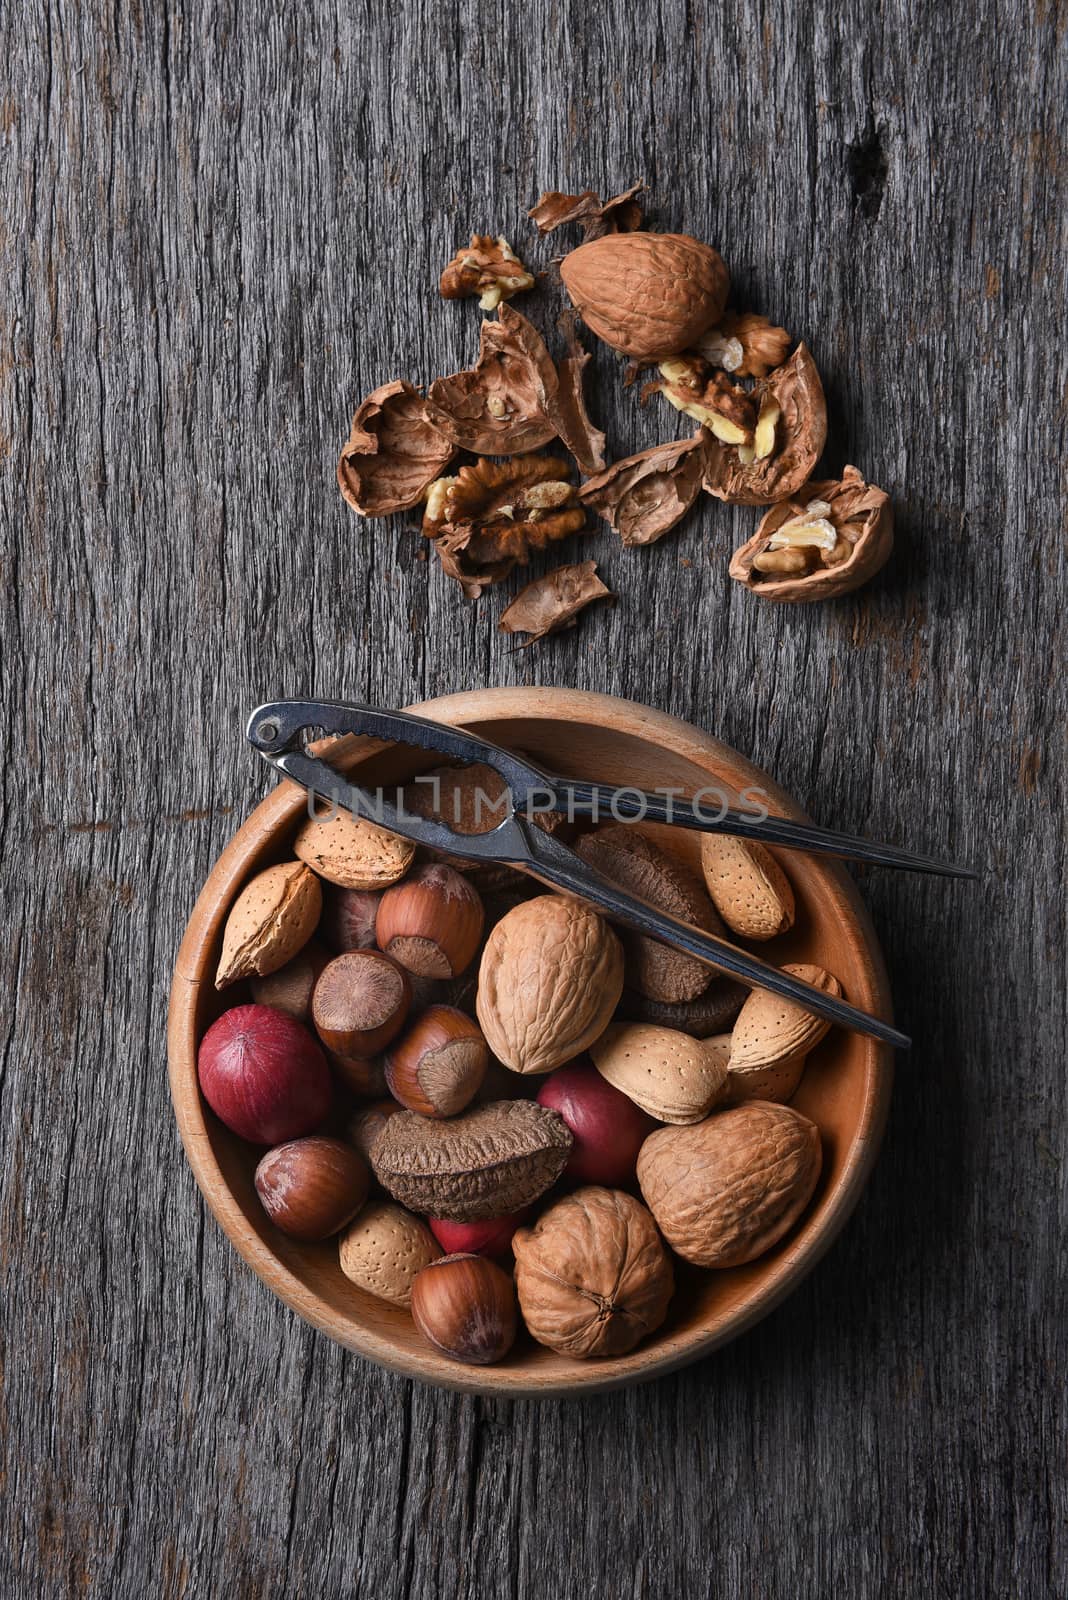 Overhead view of a bowl of mixed nuts with nutcracker and cracked nuts on a rustic wood table.